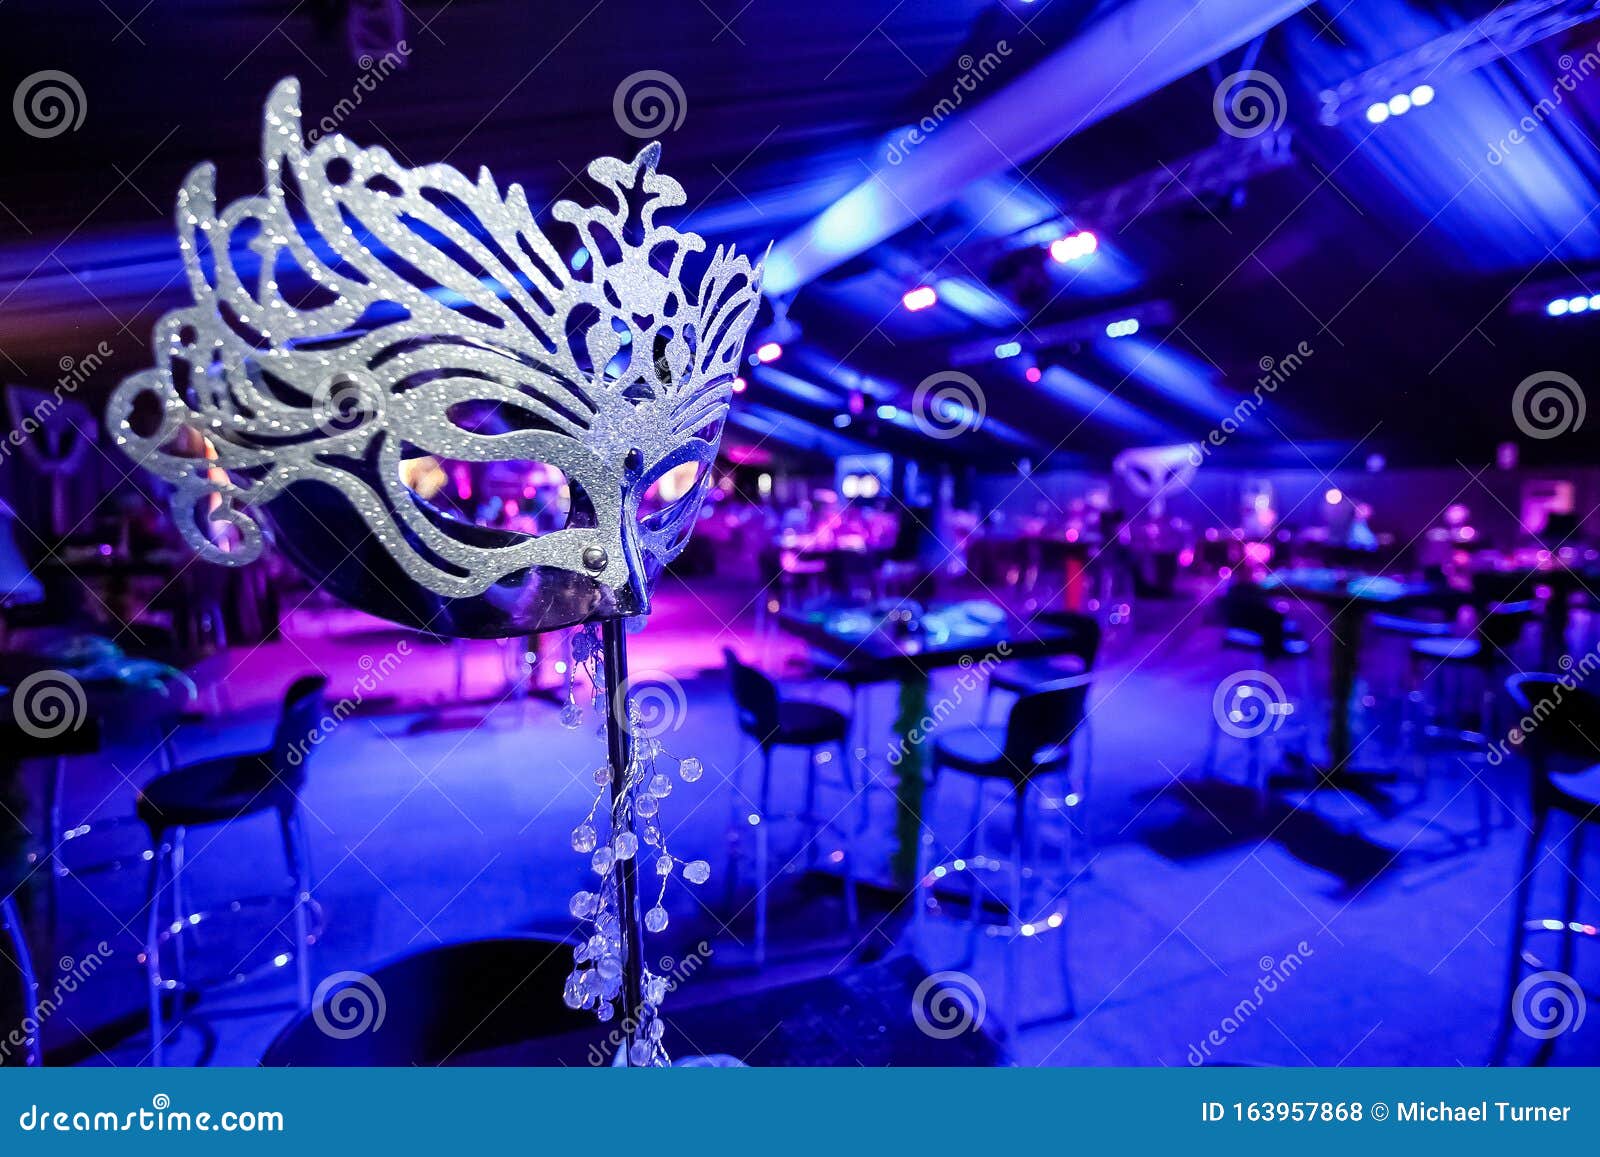 decor at corporate christmas gala event party